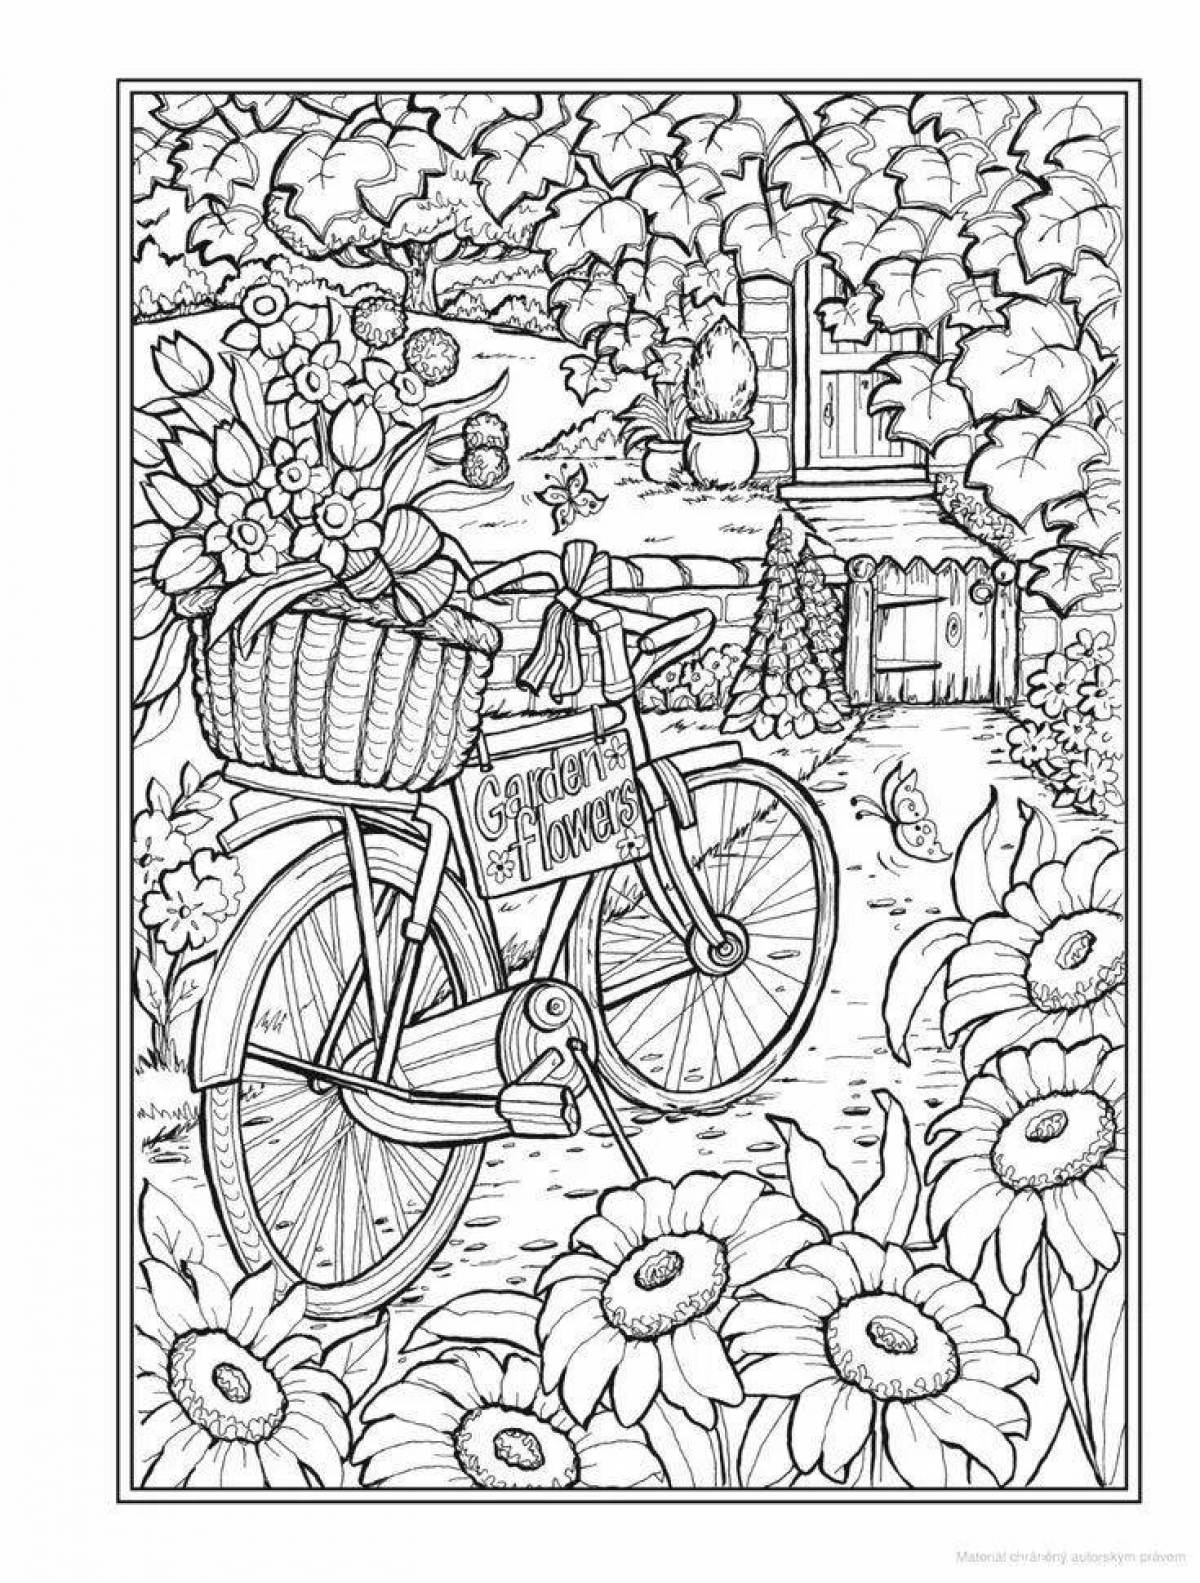 Creative haven coloring page is awesome